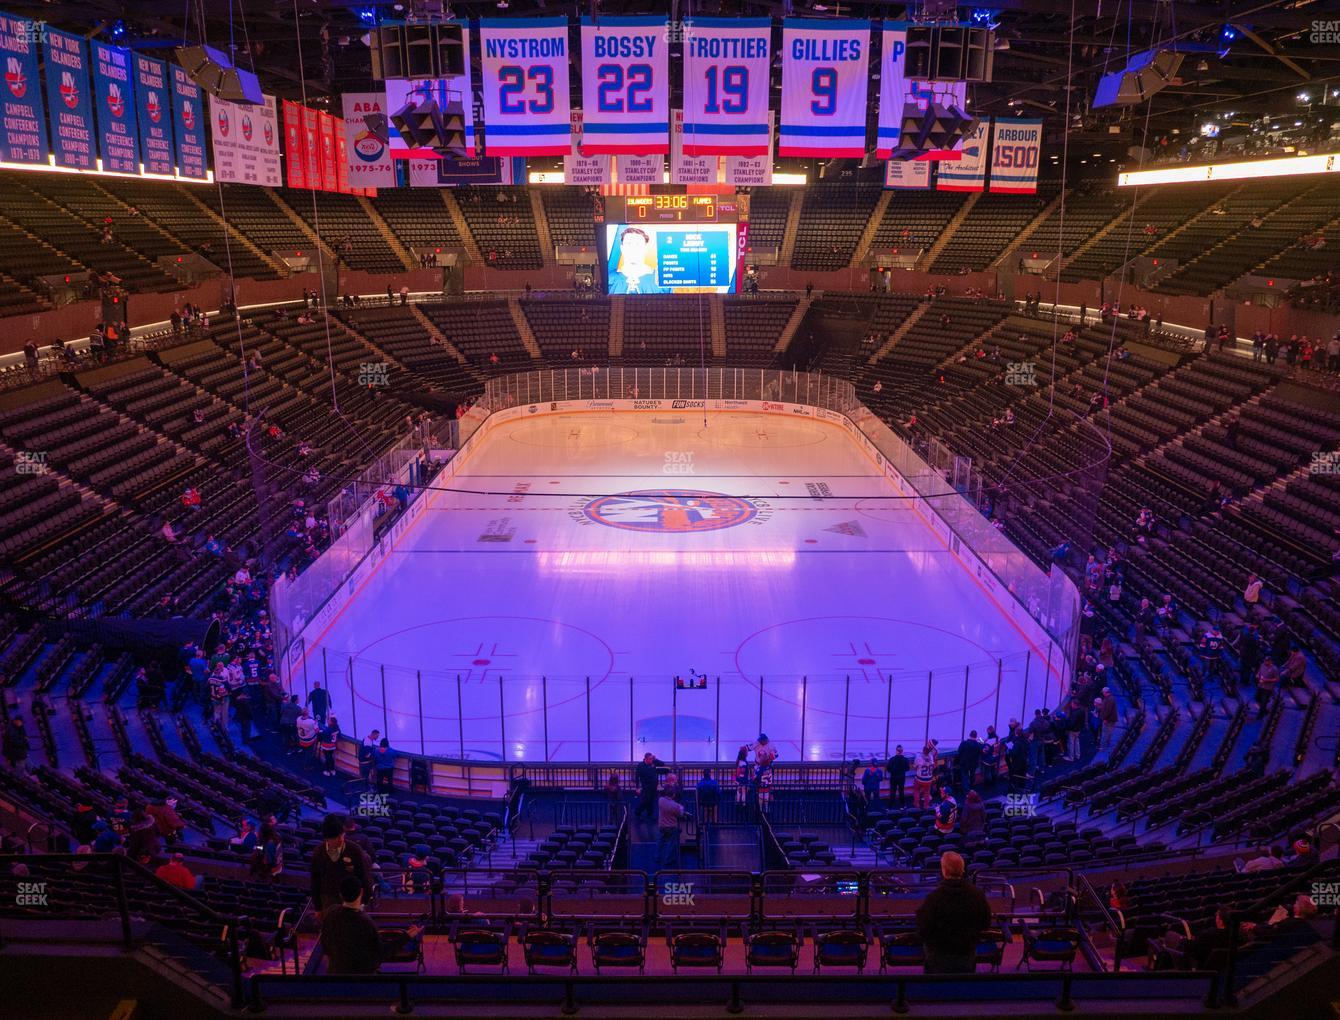 Nassau Coliseum Seating Chart With Rows